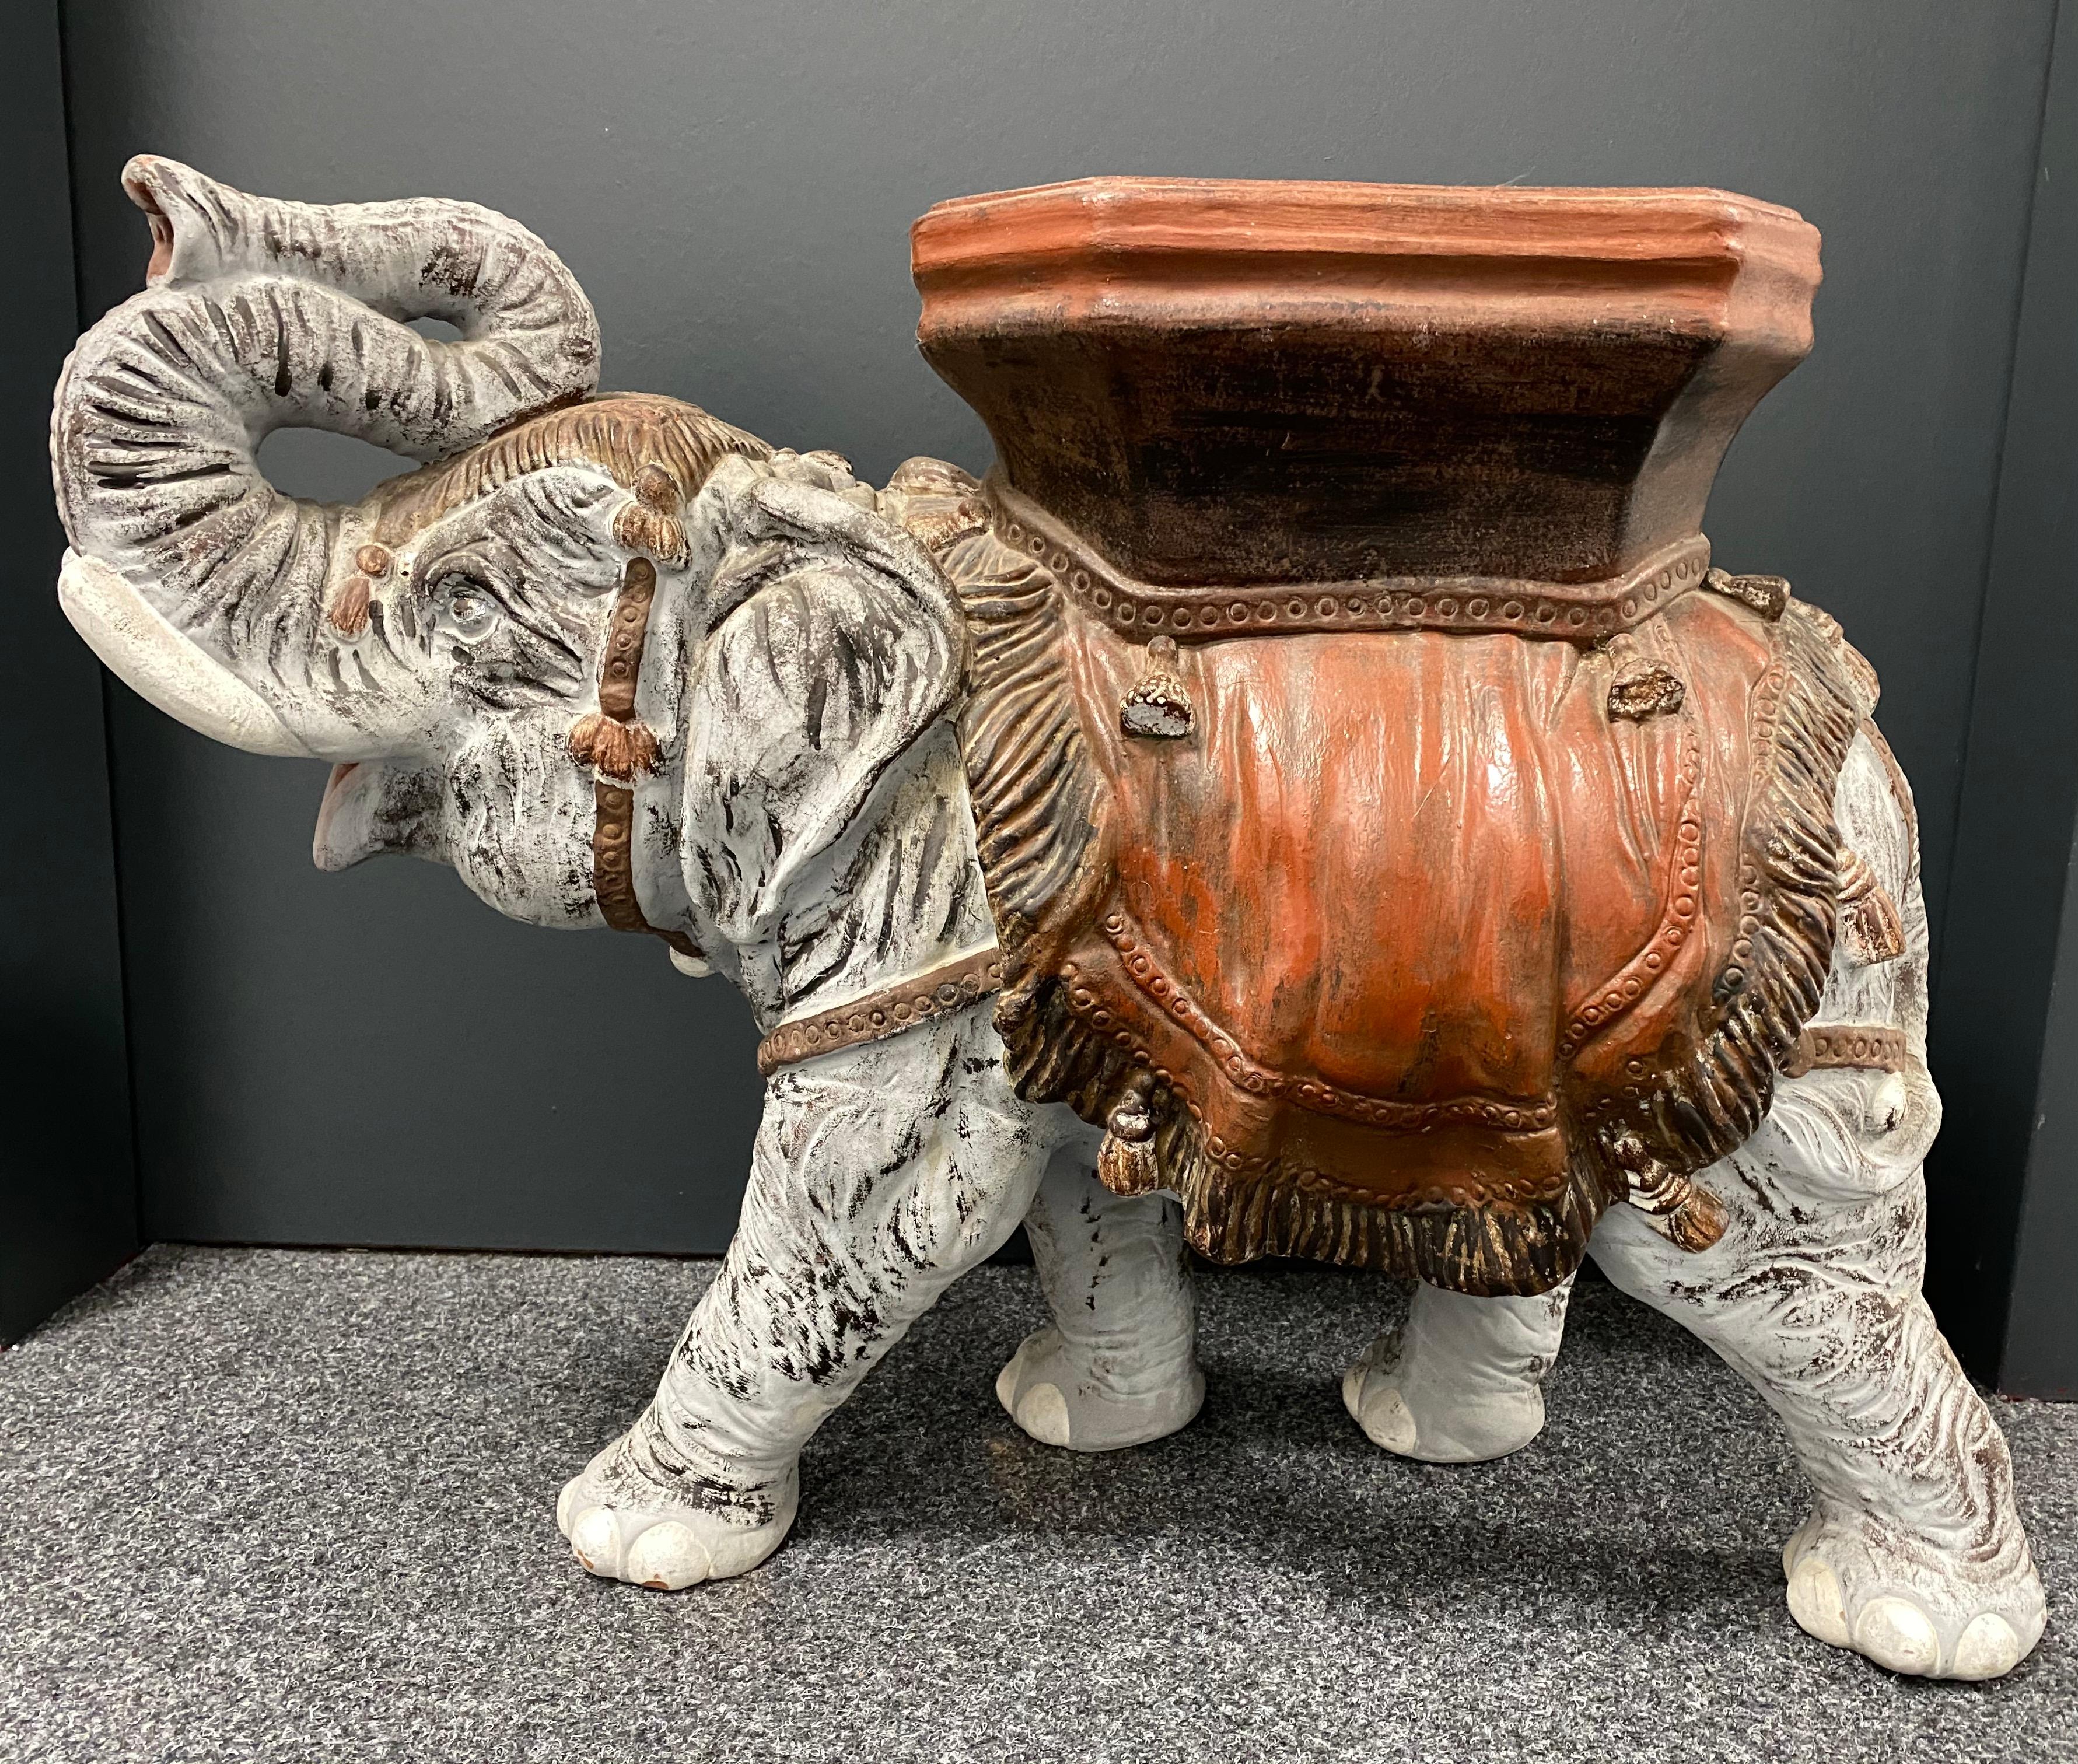 Mid-20th century earthenware terracotta garden stool plant stand or seat, flower pot seat or side table. Handmade of terracotta. Vintage garden seat in the shape of an elephant with a pedestal top, all in grey, white colored with brown and black